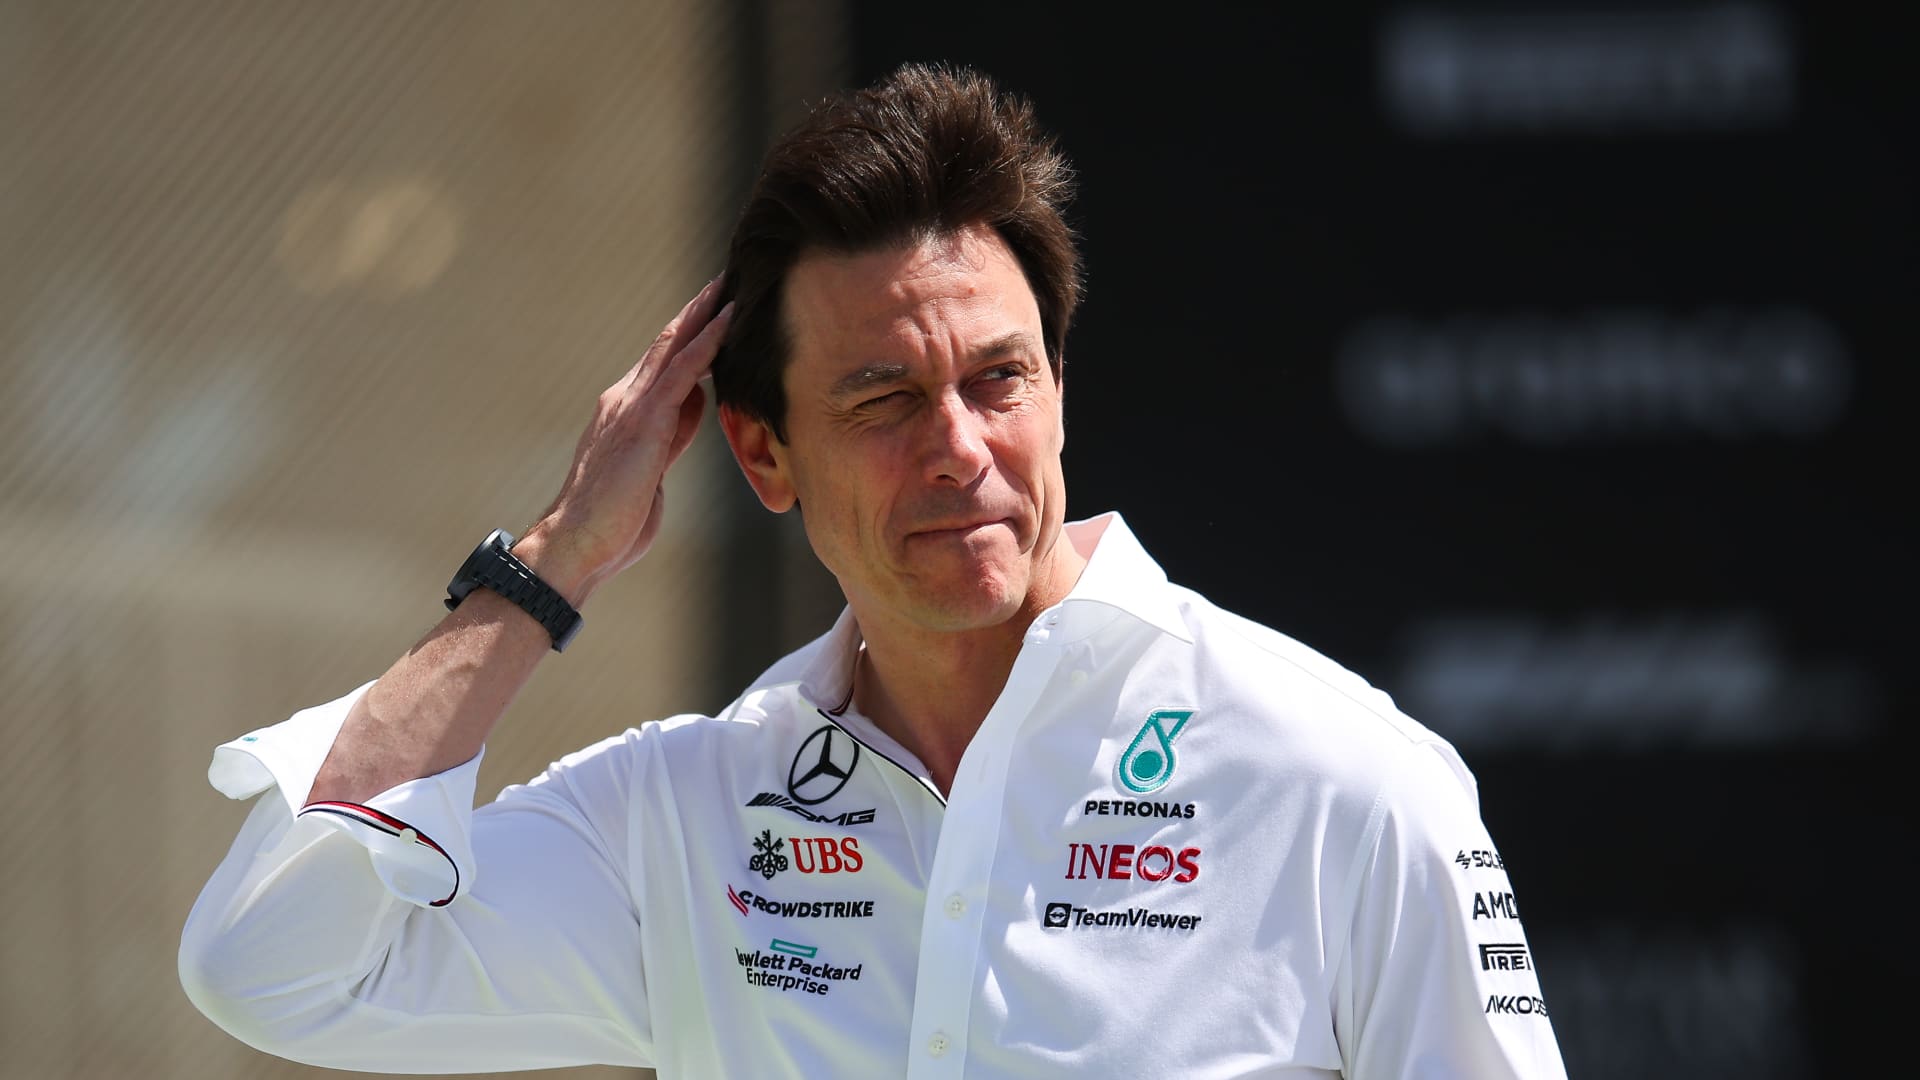 Mercedes’ Toto Wolff shares his tips on leading a superstar team and 2 key values for long-term success